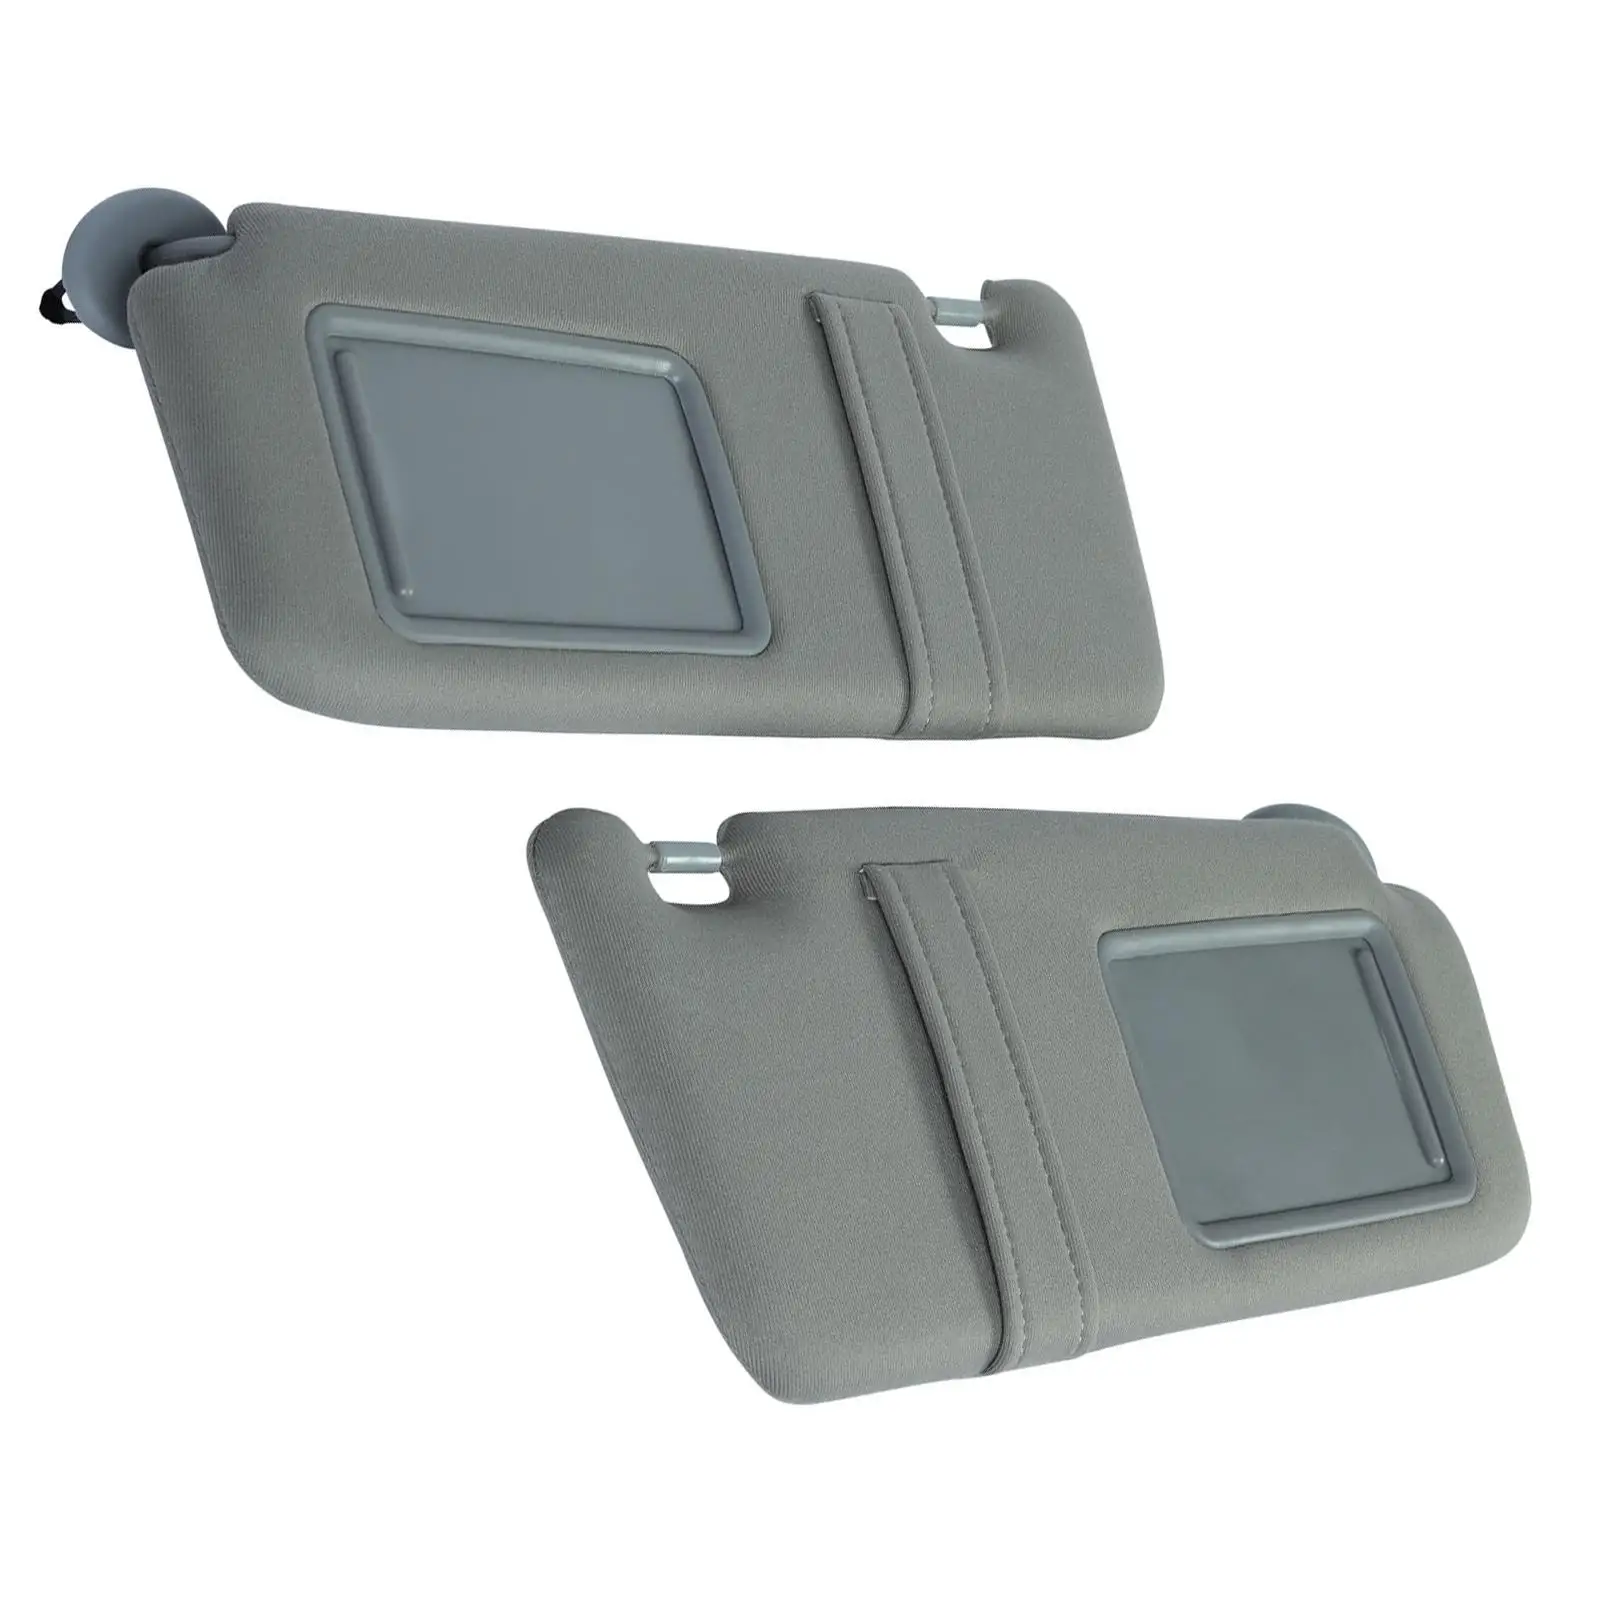 2 Pieces Car Sun Visor 74320-06780-b0 Left Right 74320-33B81-b0 Direct Replaces Gray Color for Toyota for camry 2007-2011